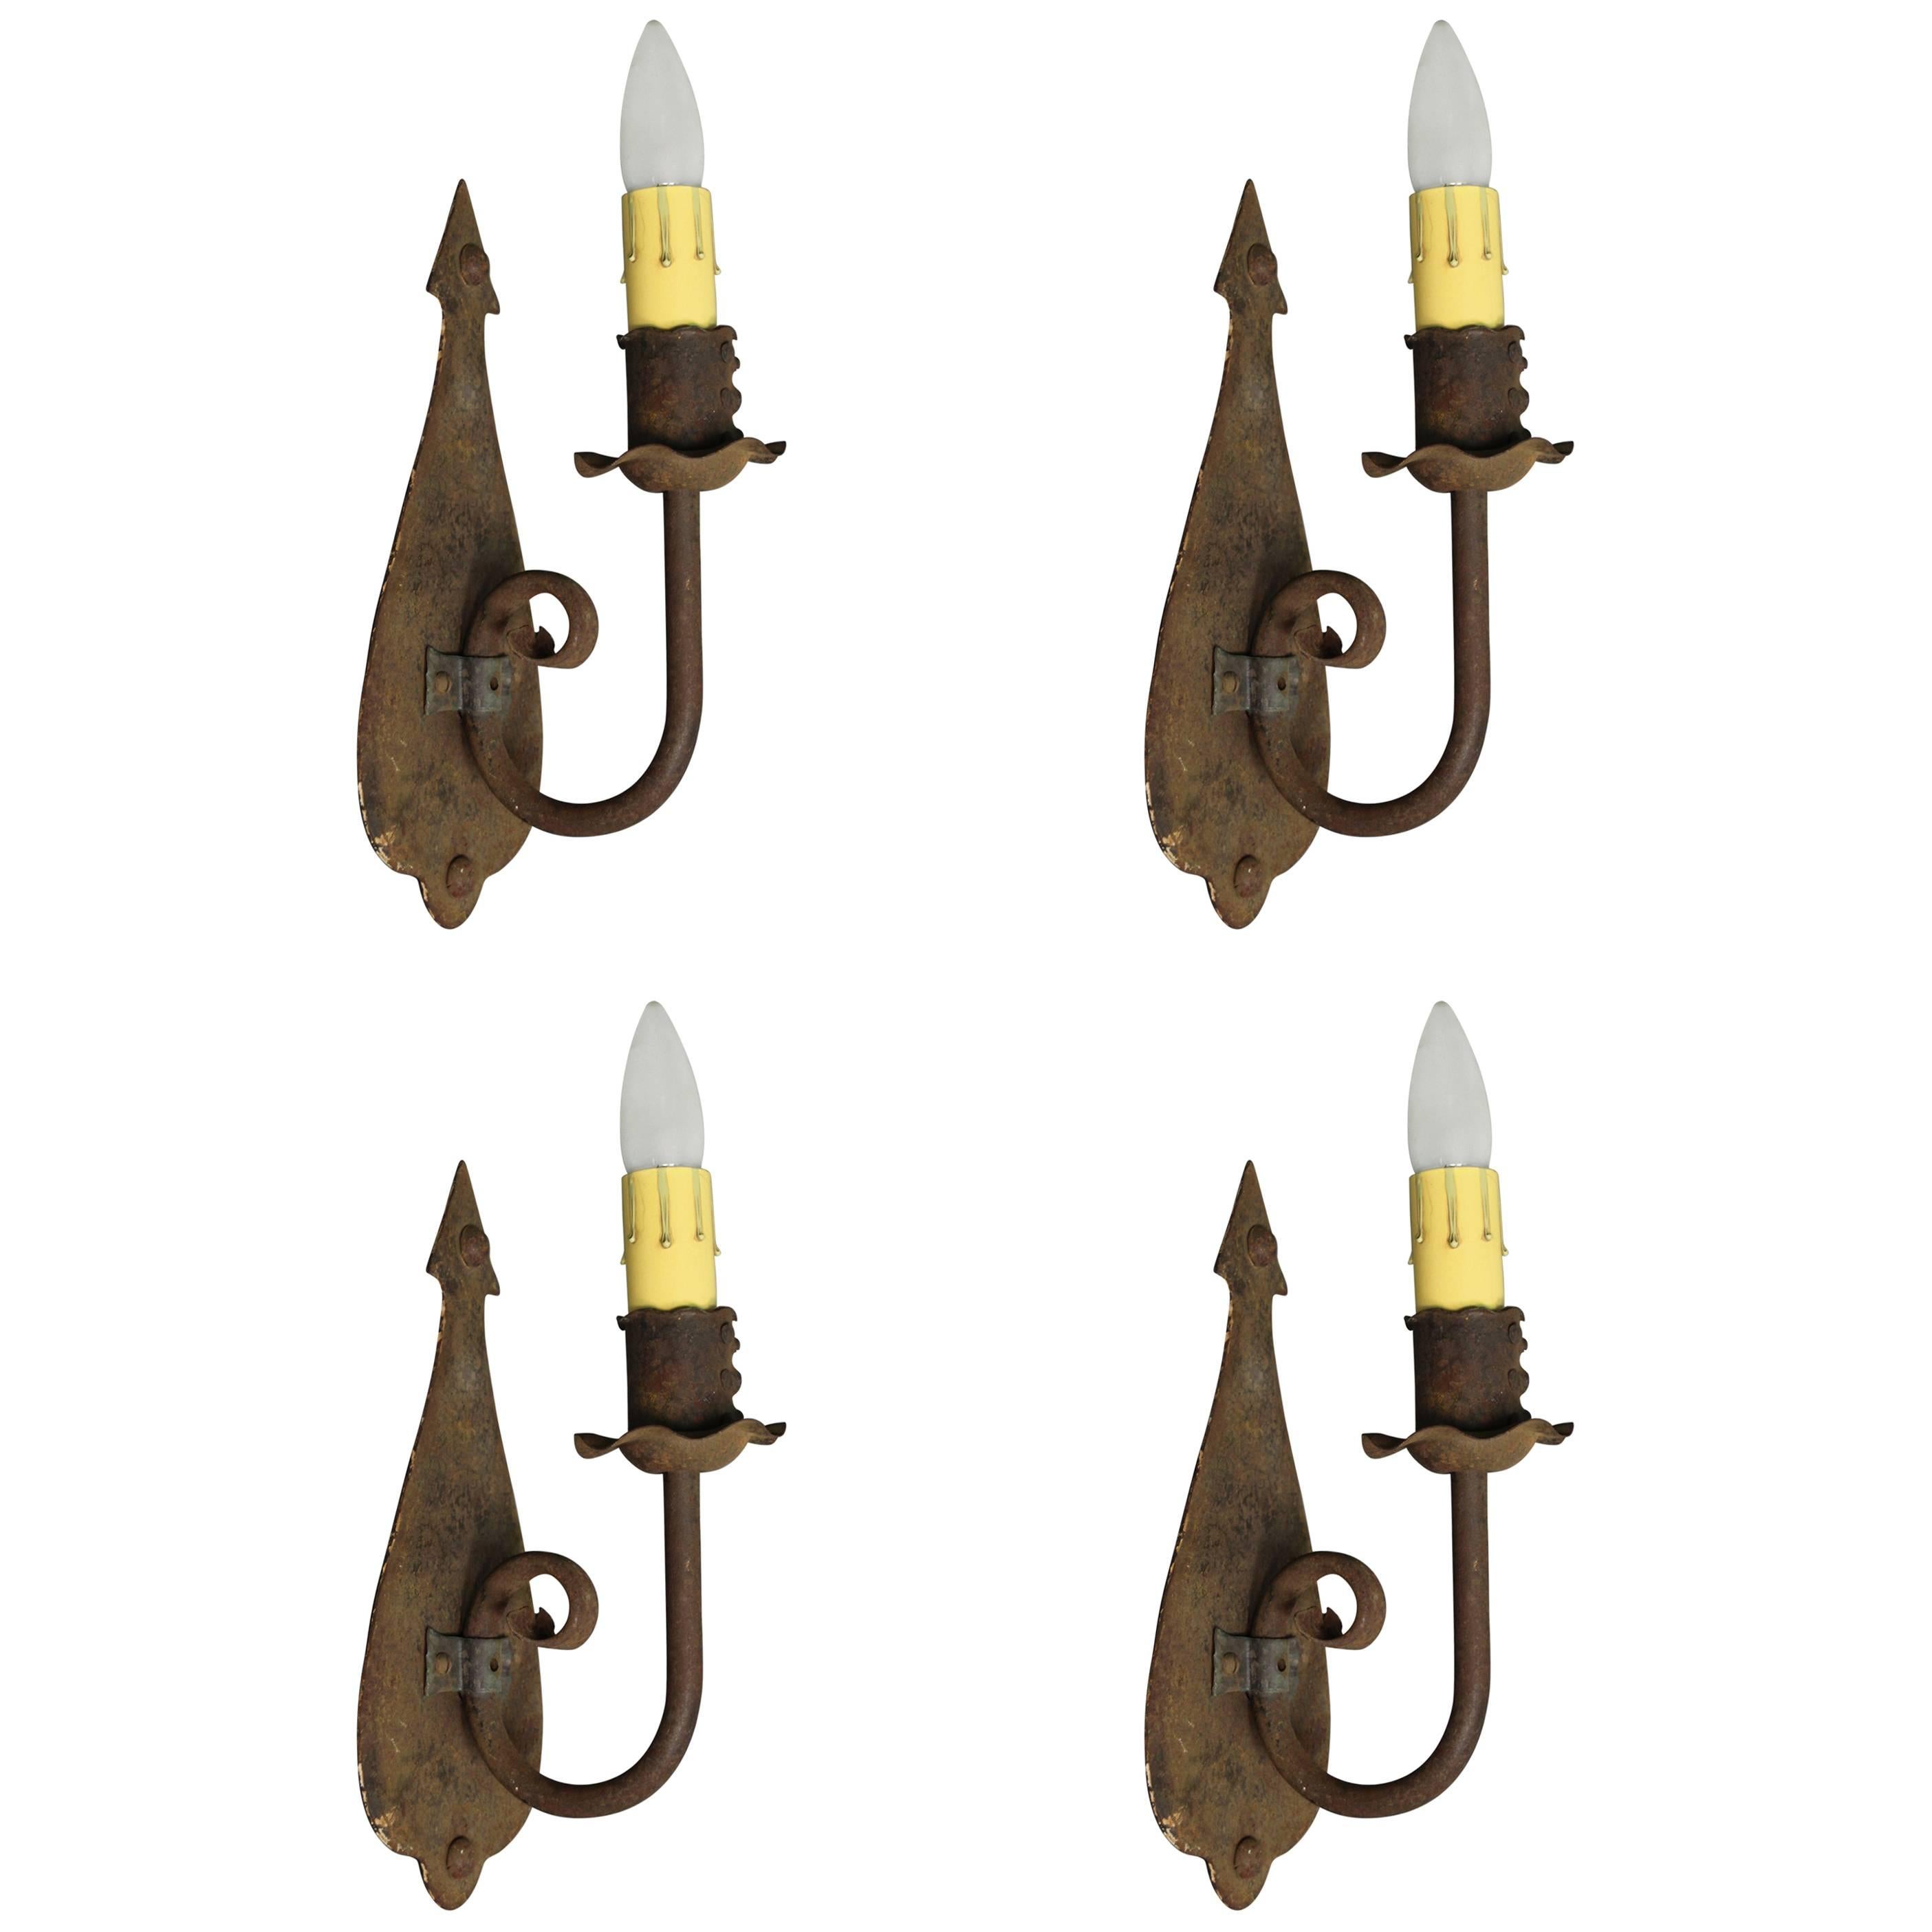 One of Four Antique Single Wrought Iron Spanish Revival Sconce, circa 1920s